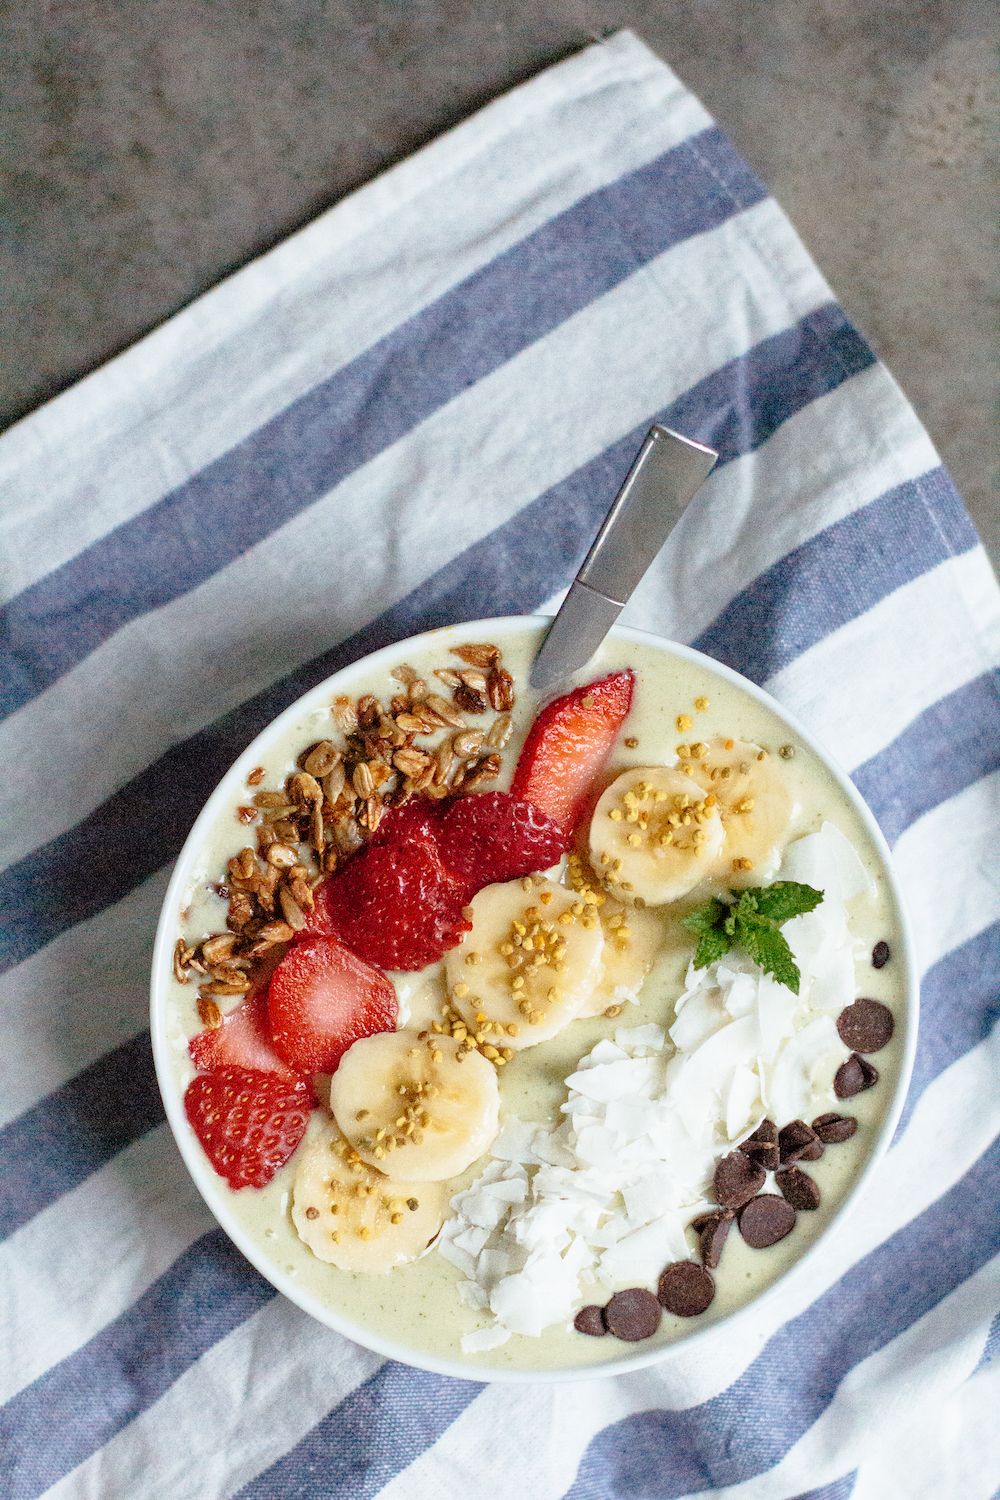 Banana Blast Smoothie Bowl From The Society | Nutrition Stripped